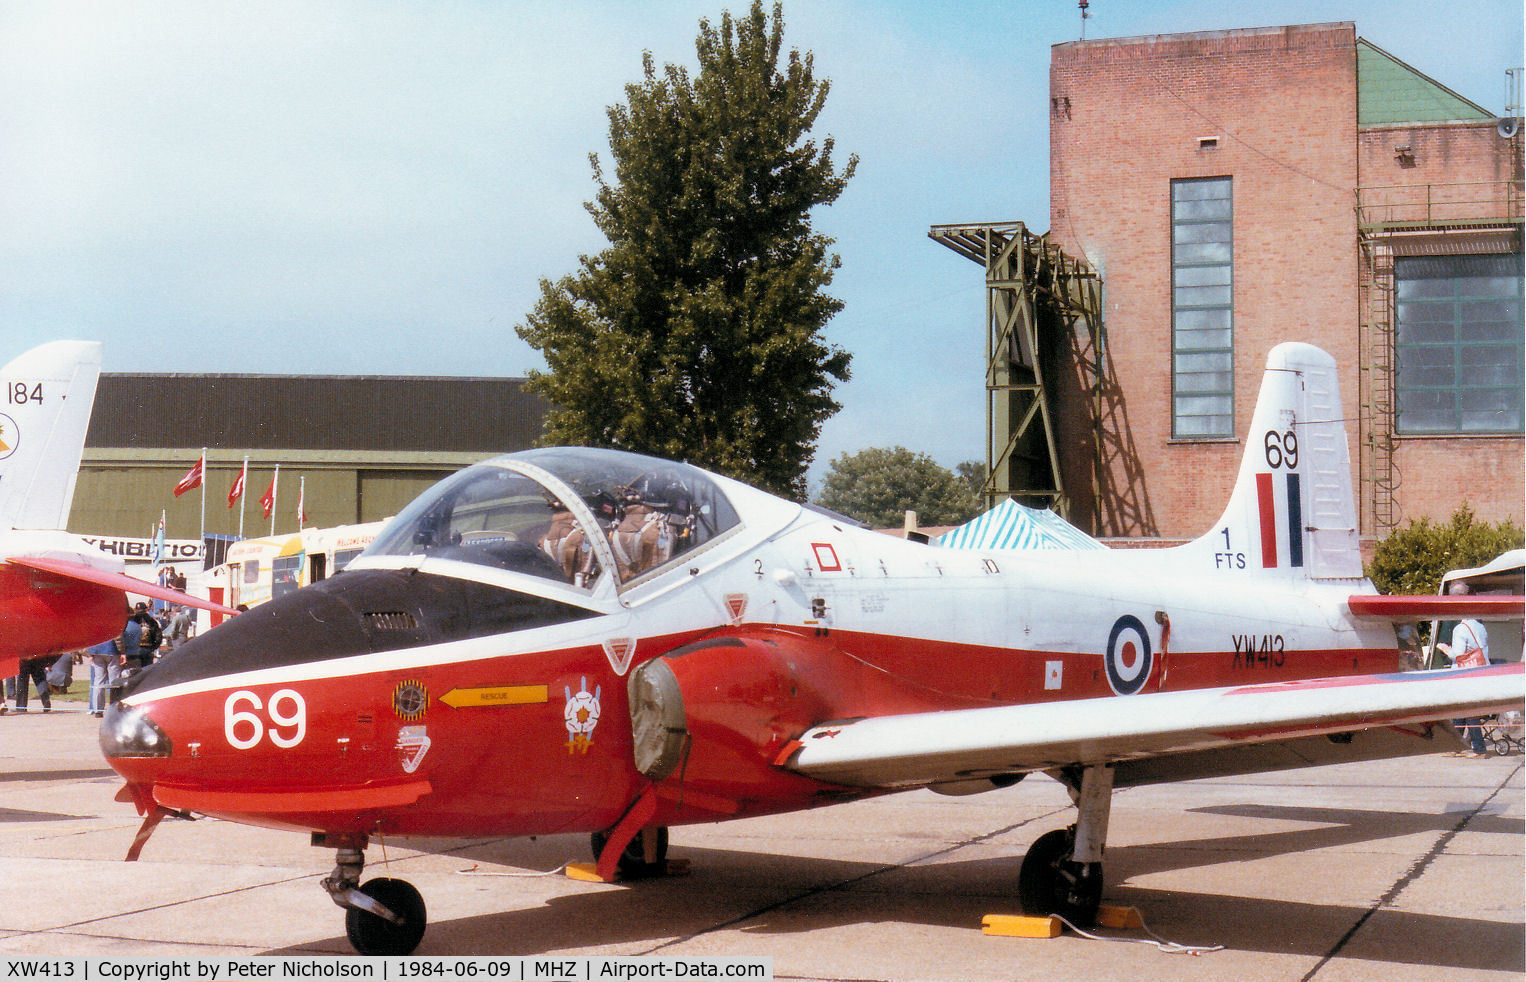 XW413, 1971 BAC 84 Jet Provost T.5A C/N EEP/JP/1035, Jet Provost T.5A of 1 Flying Training School at RAF Linton-on-Ouse on display at the 1984 RAF Mildenhall Air Fete.